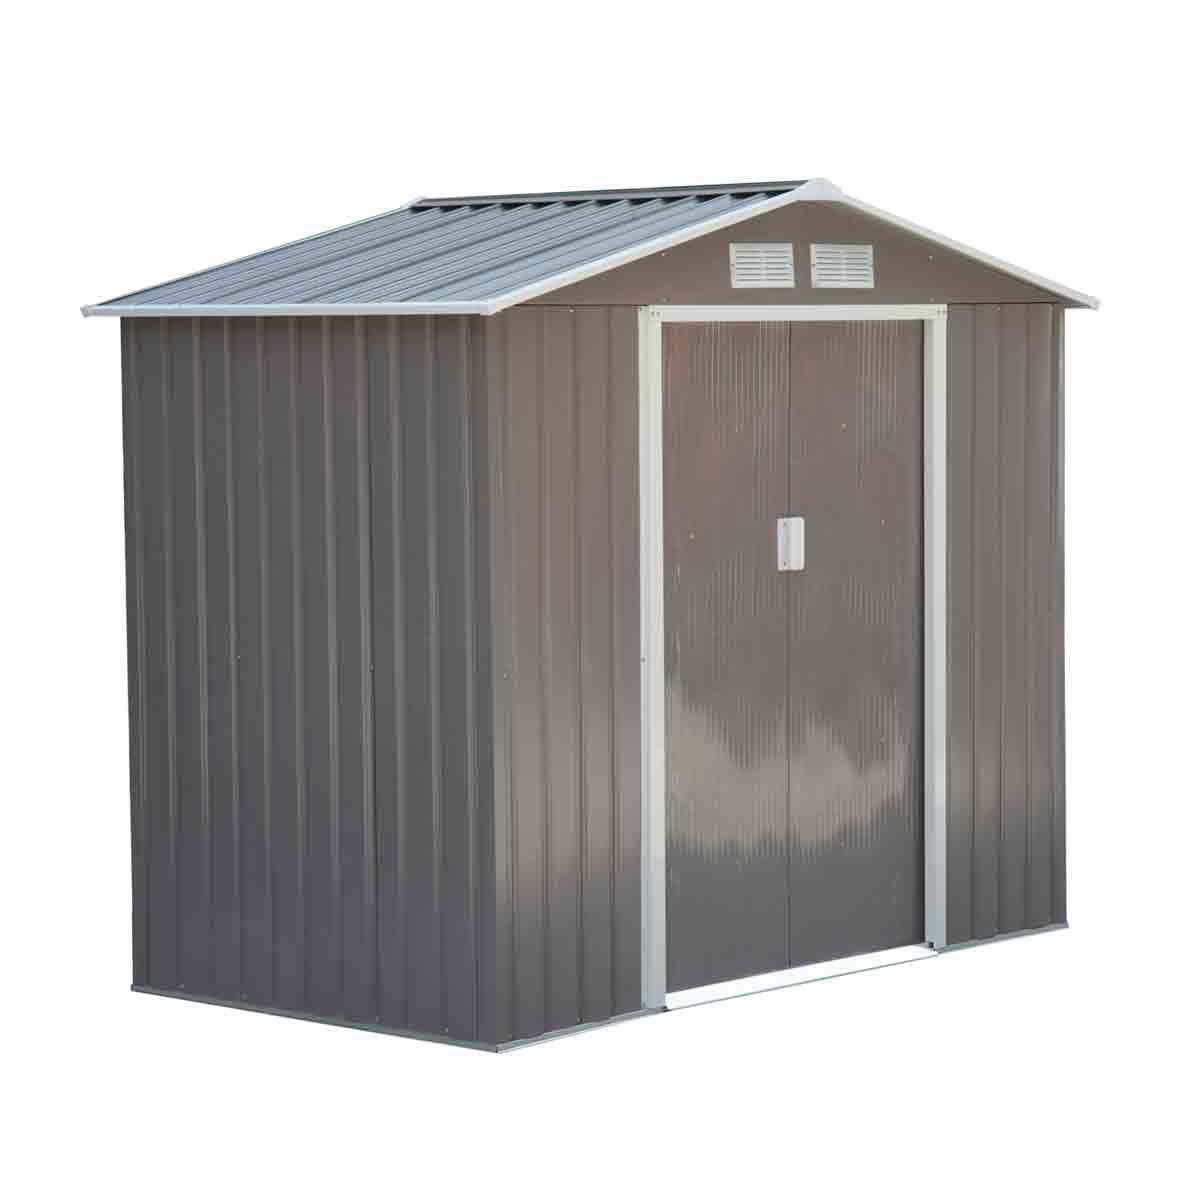 Outsunny Garden Shed Storage Unit W/Locking Door Floor Foundation Vents 7Ftx4Ft